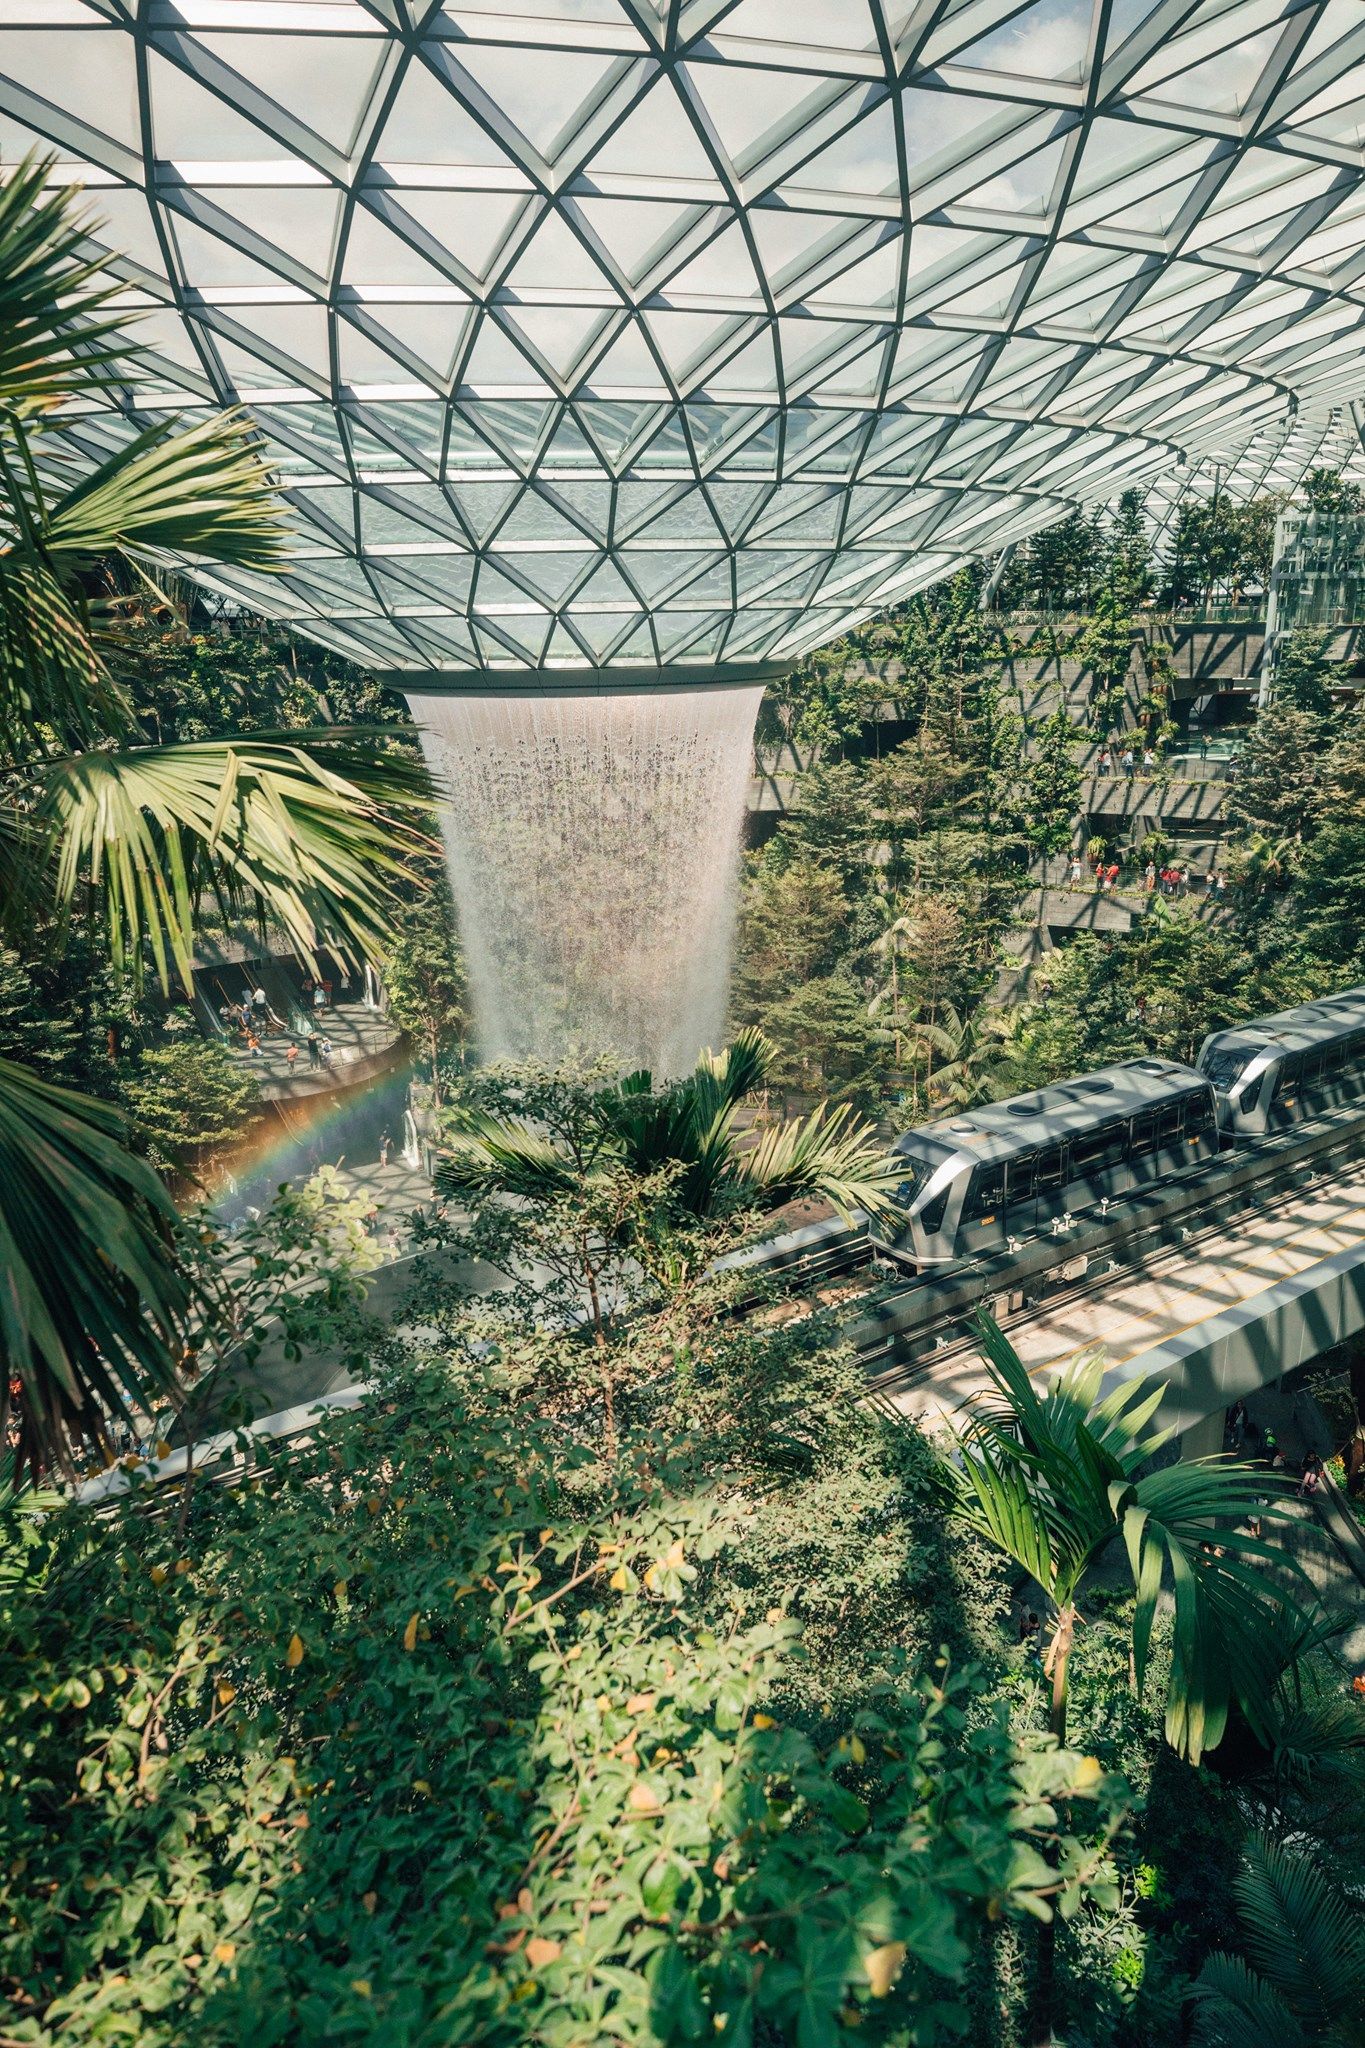 The waterfall installation is one of Singapore Changi Airport’s most iconic features – but that wasn’t enough to make it No 1 airport in the world, apparently. Photo: Changi Airport/Facebook